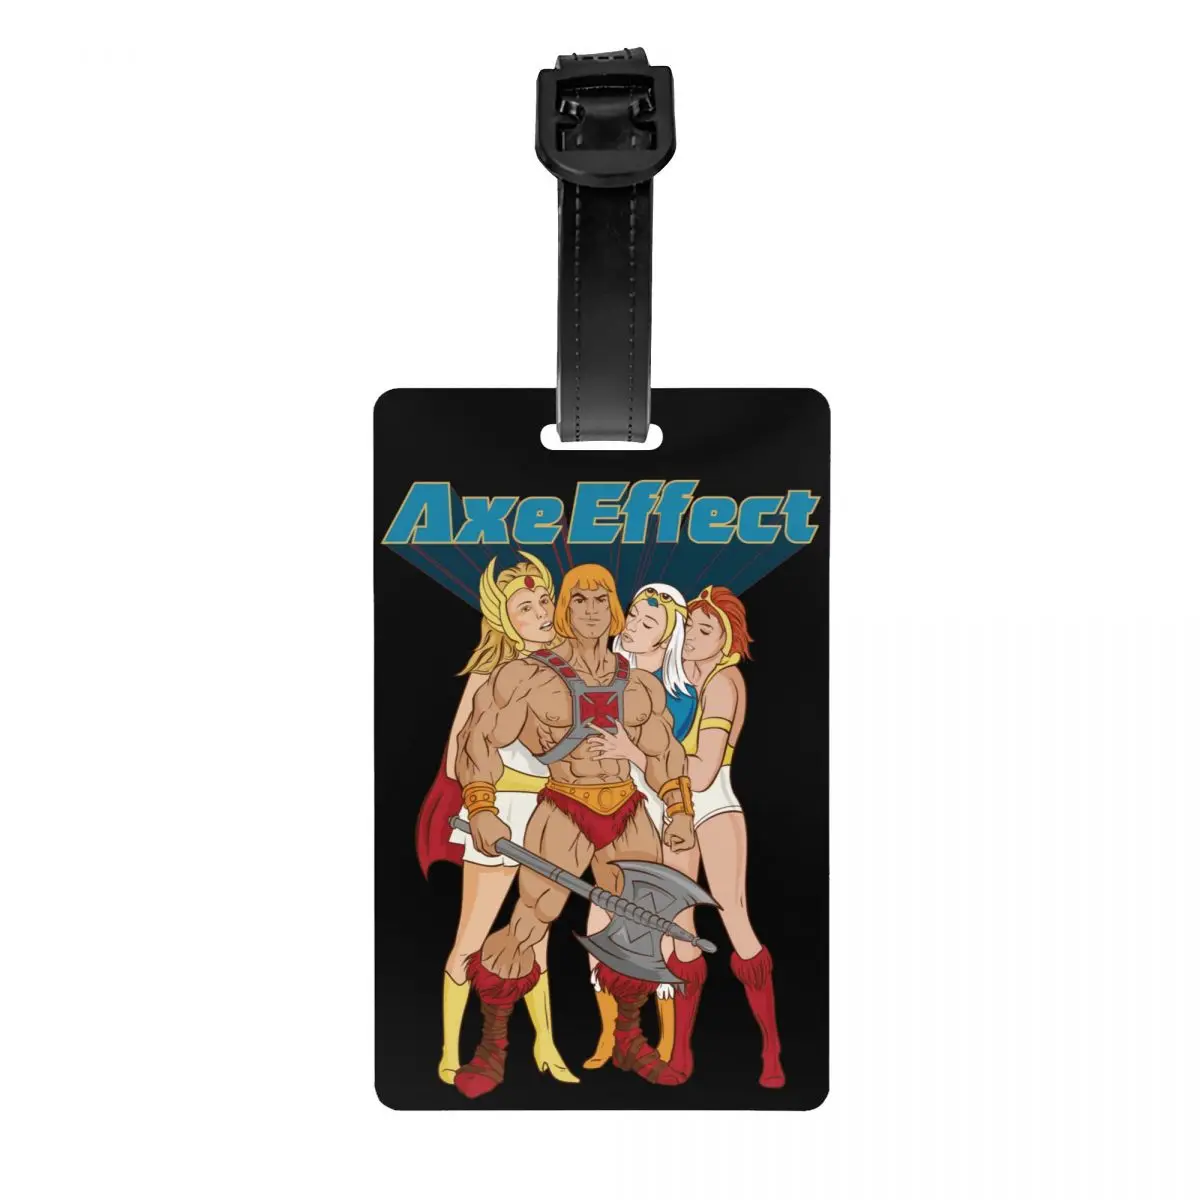 

He-Man And The Masters Of The Universe Luggage Tag Privacy Protection The Axe Effect Baggage Tags Travel Bag Labels Suitcase